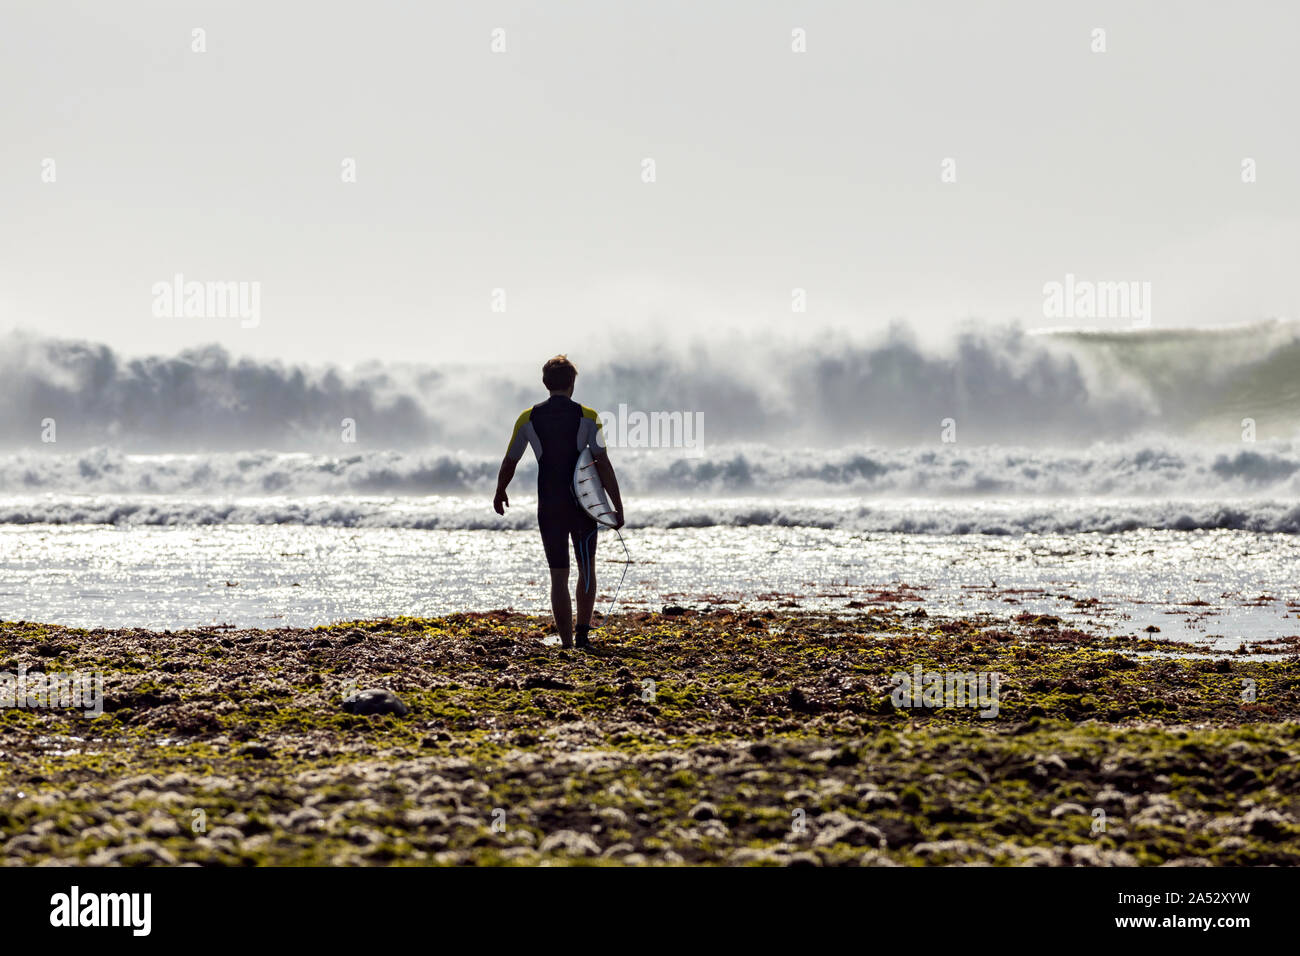 Man with surfboard walking on the beach Stock Photo